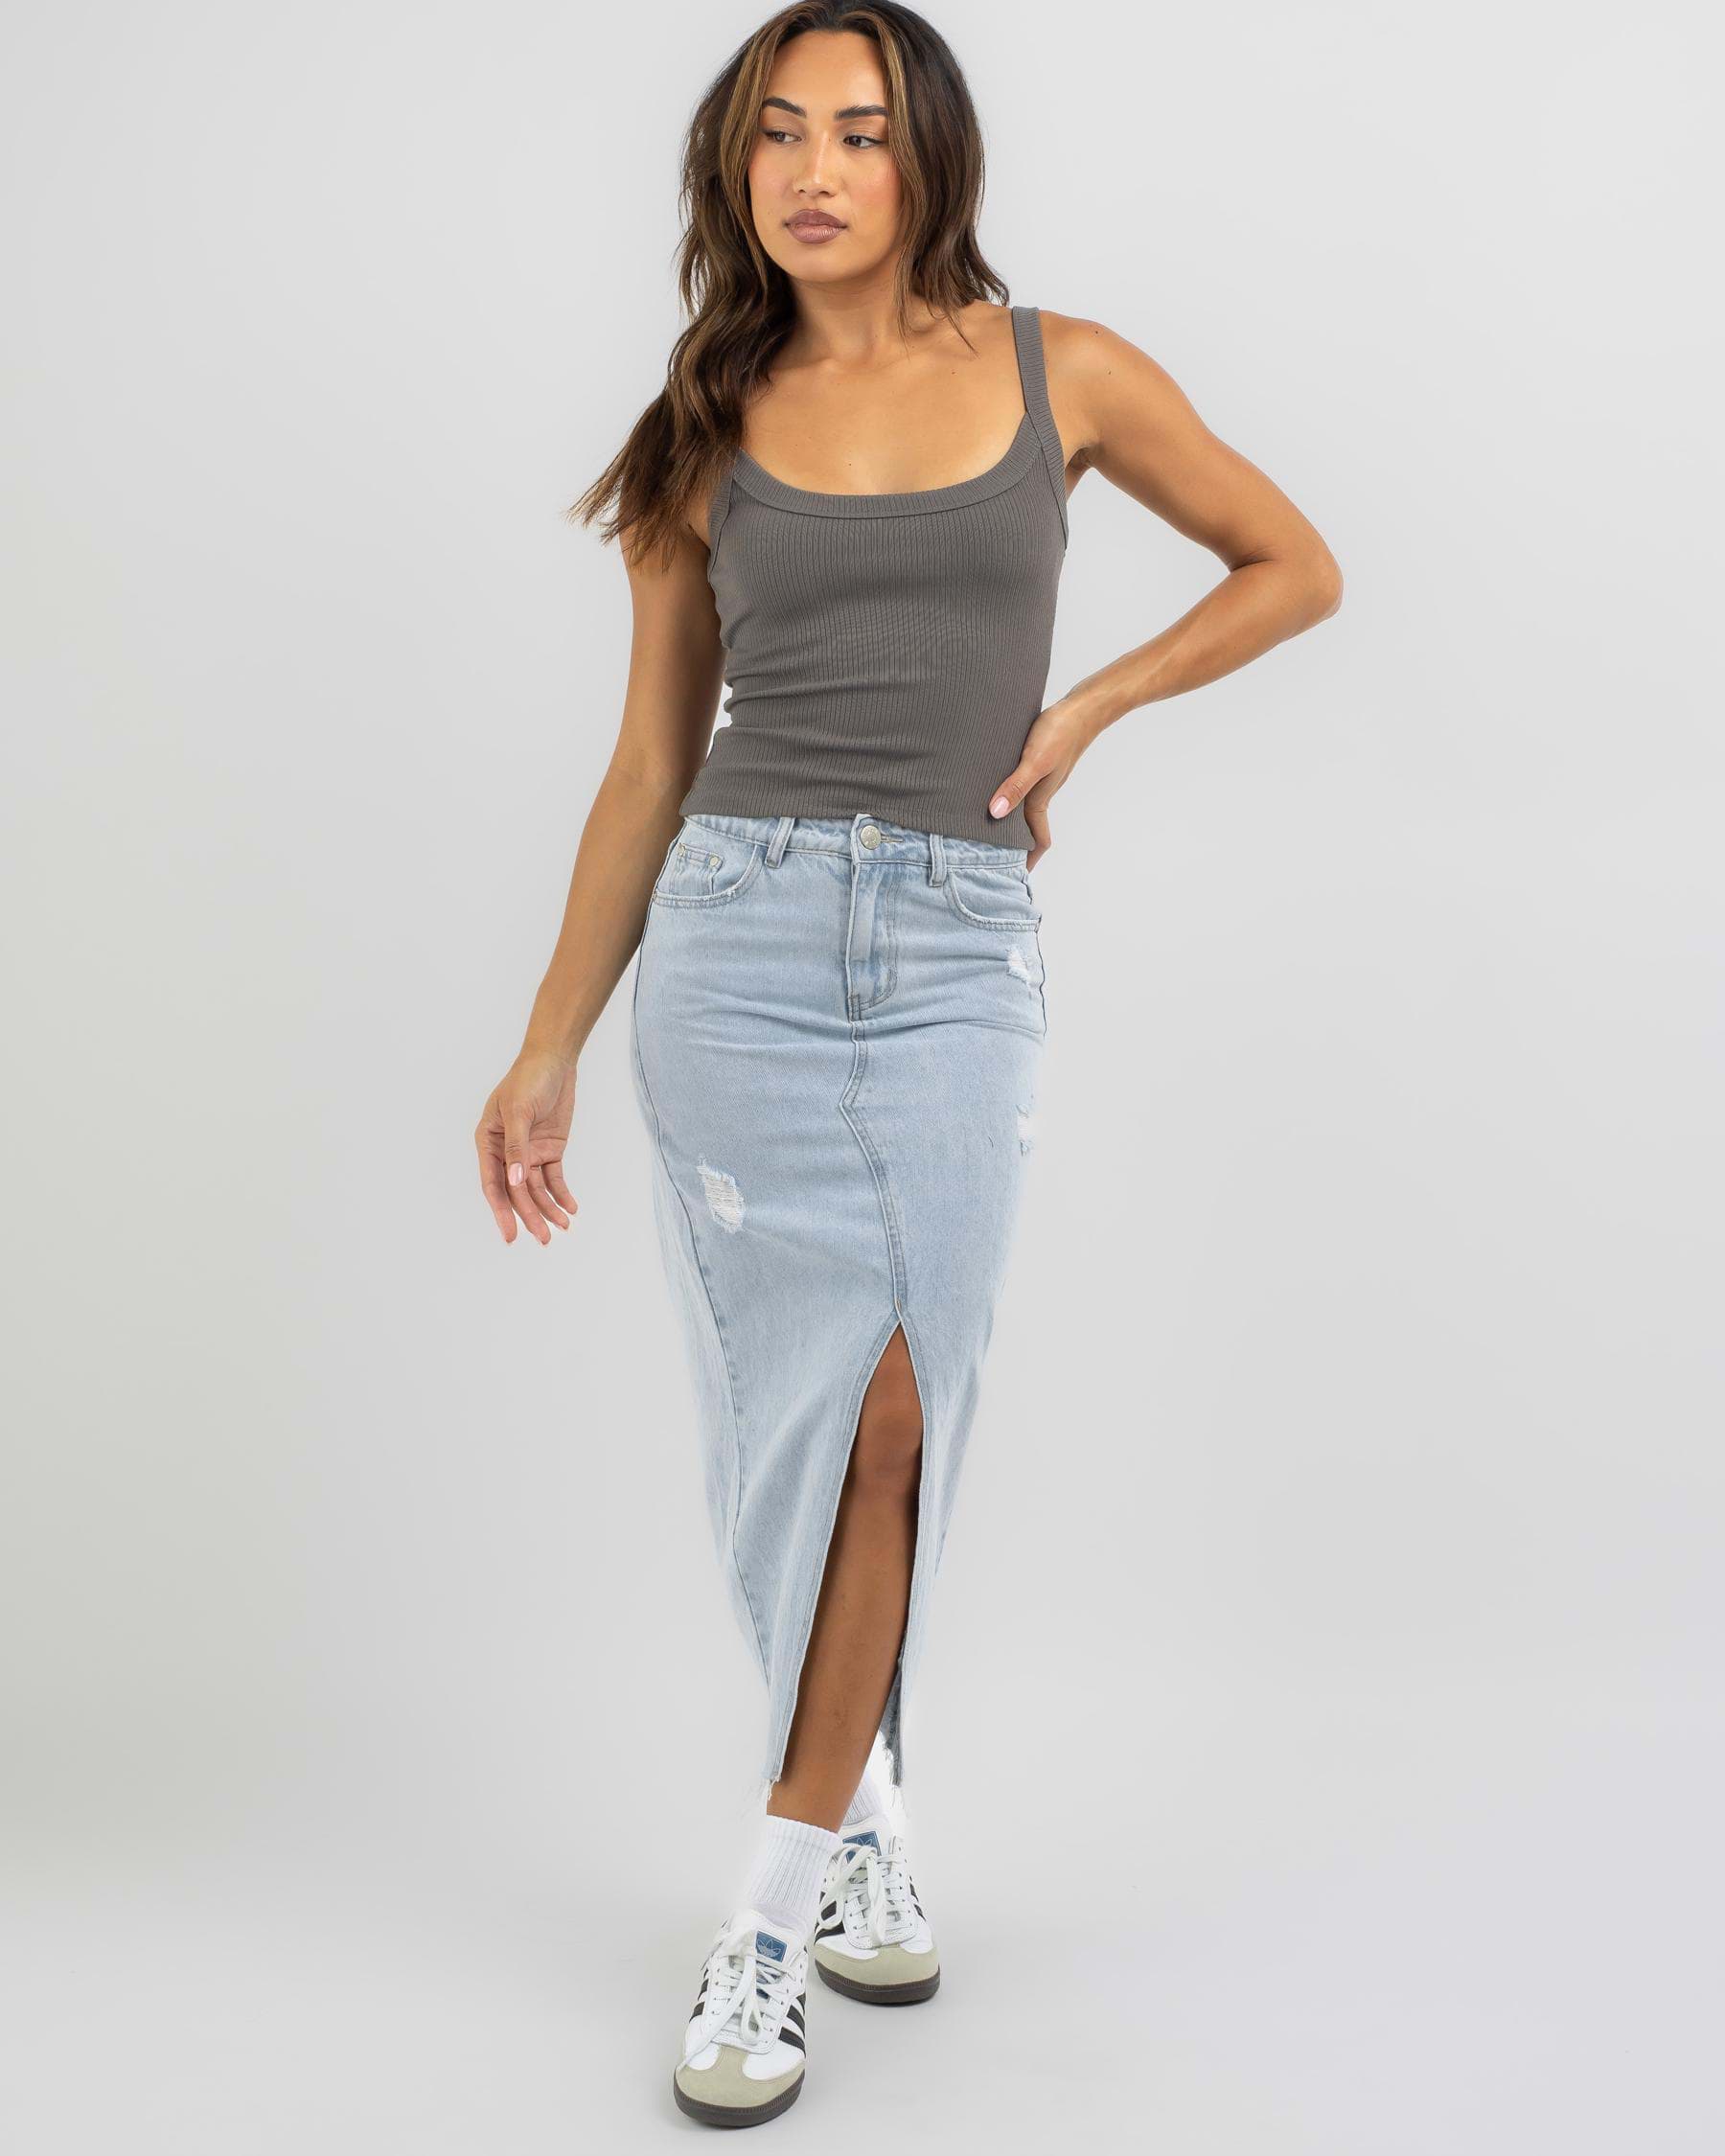 Shop Ava And Ever Ayla Basic Rib Tank Top In Charcoal - Fast Shipping ...